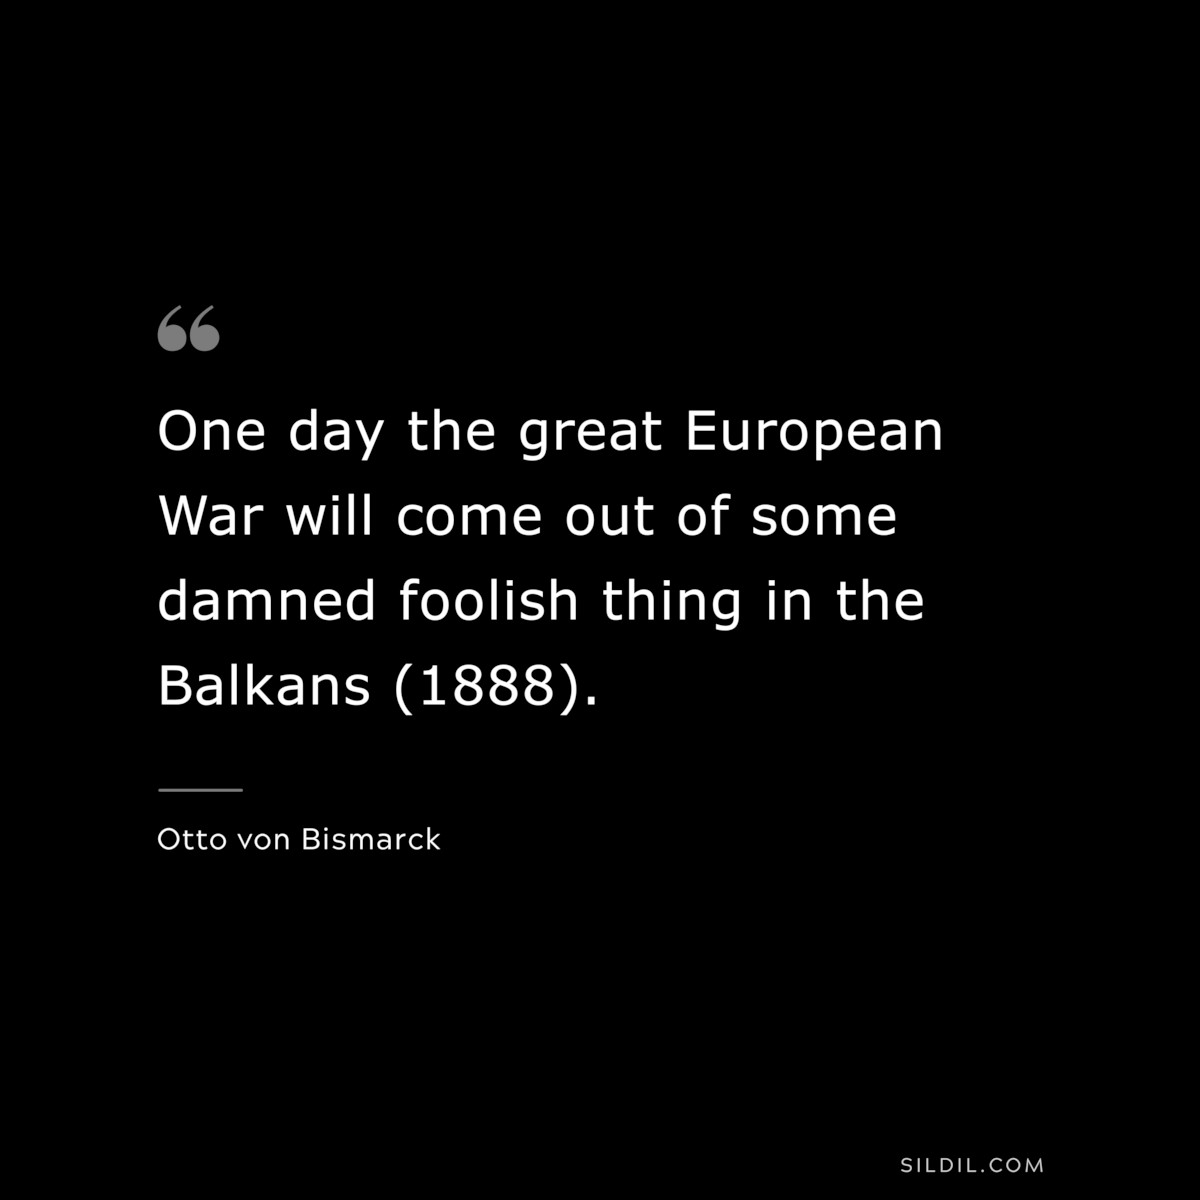 One day the great European War will come out of some damned foolish thing in the Balkans (1888). ― Otto von Bismarck